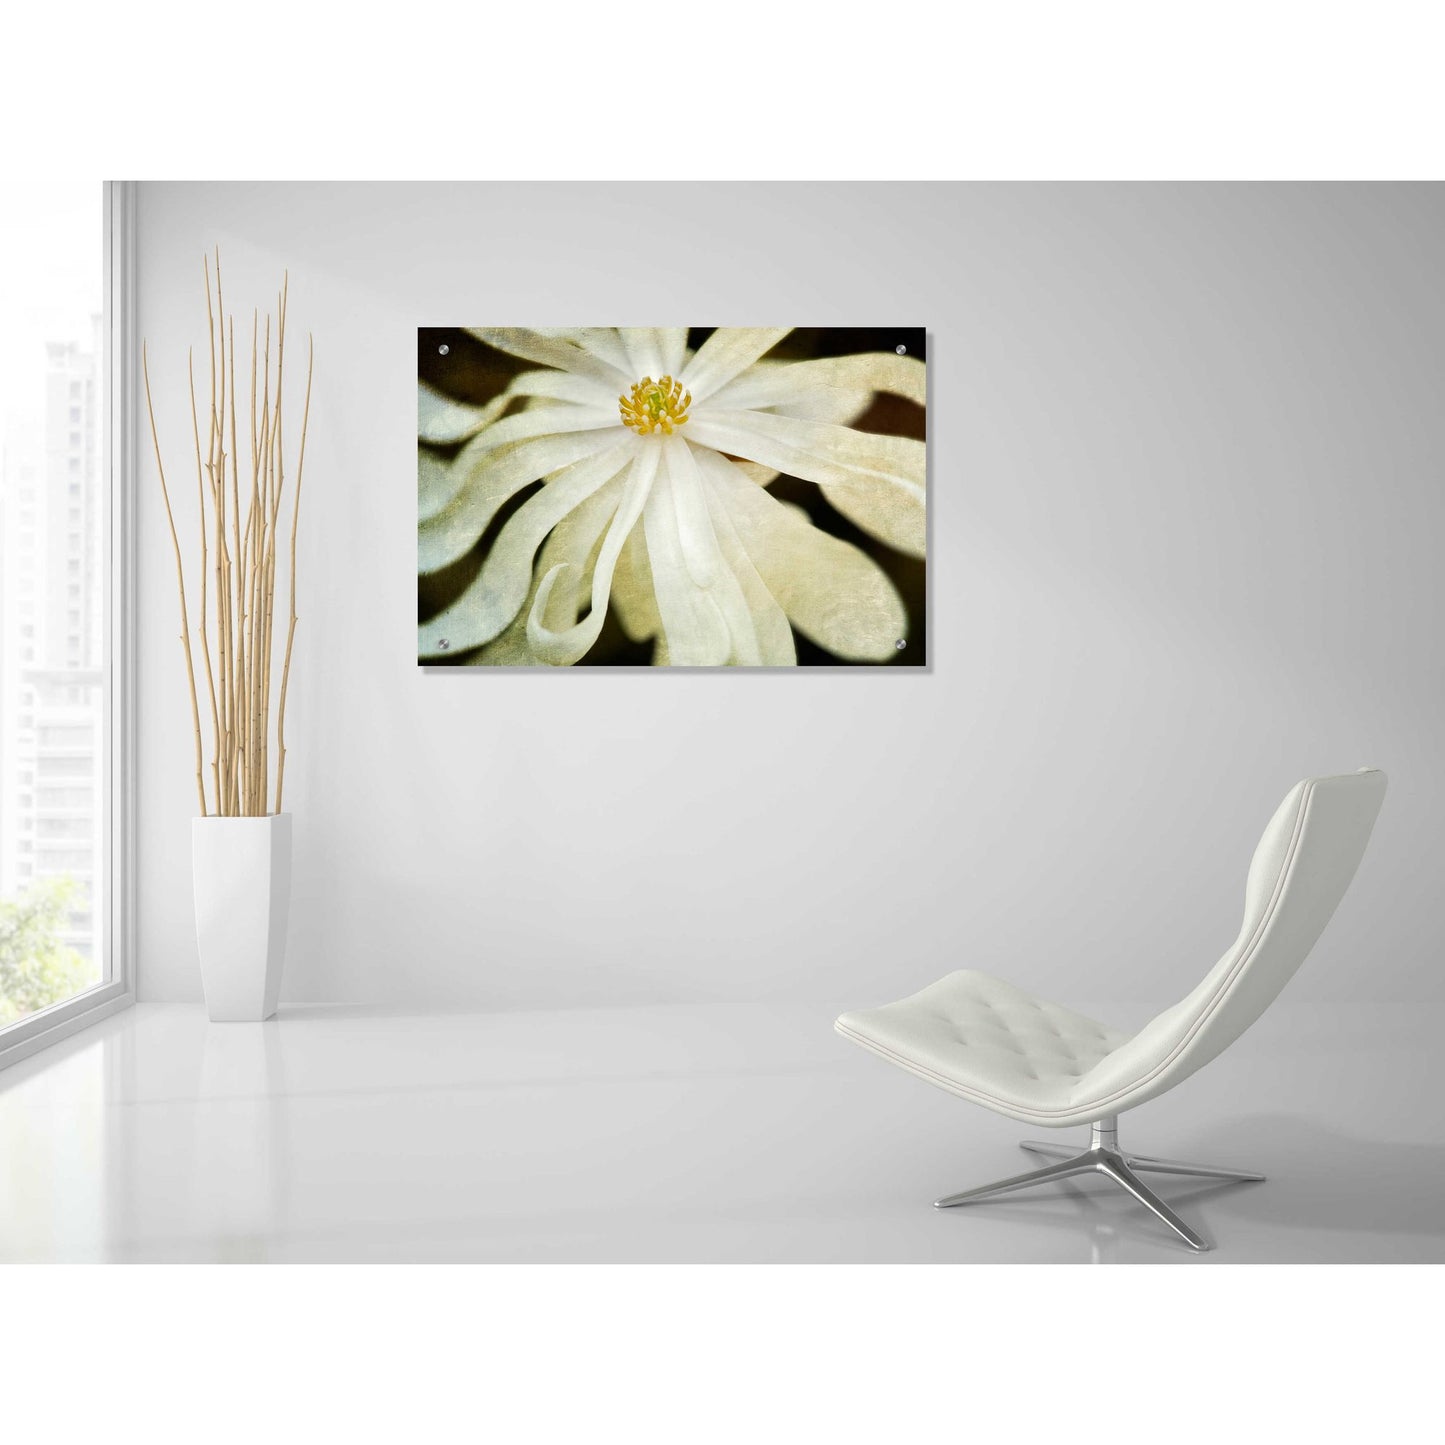 Epic Art 'White Flower' by Dennis Frates, Acrylic Glass Wall Art,36x24